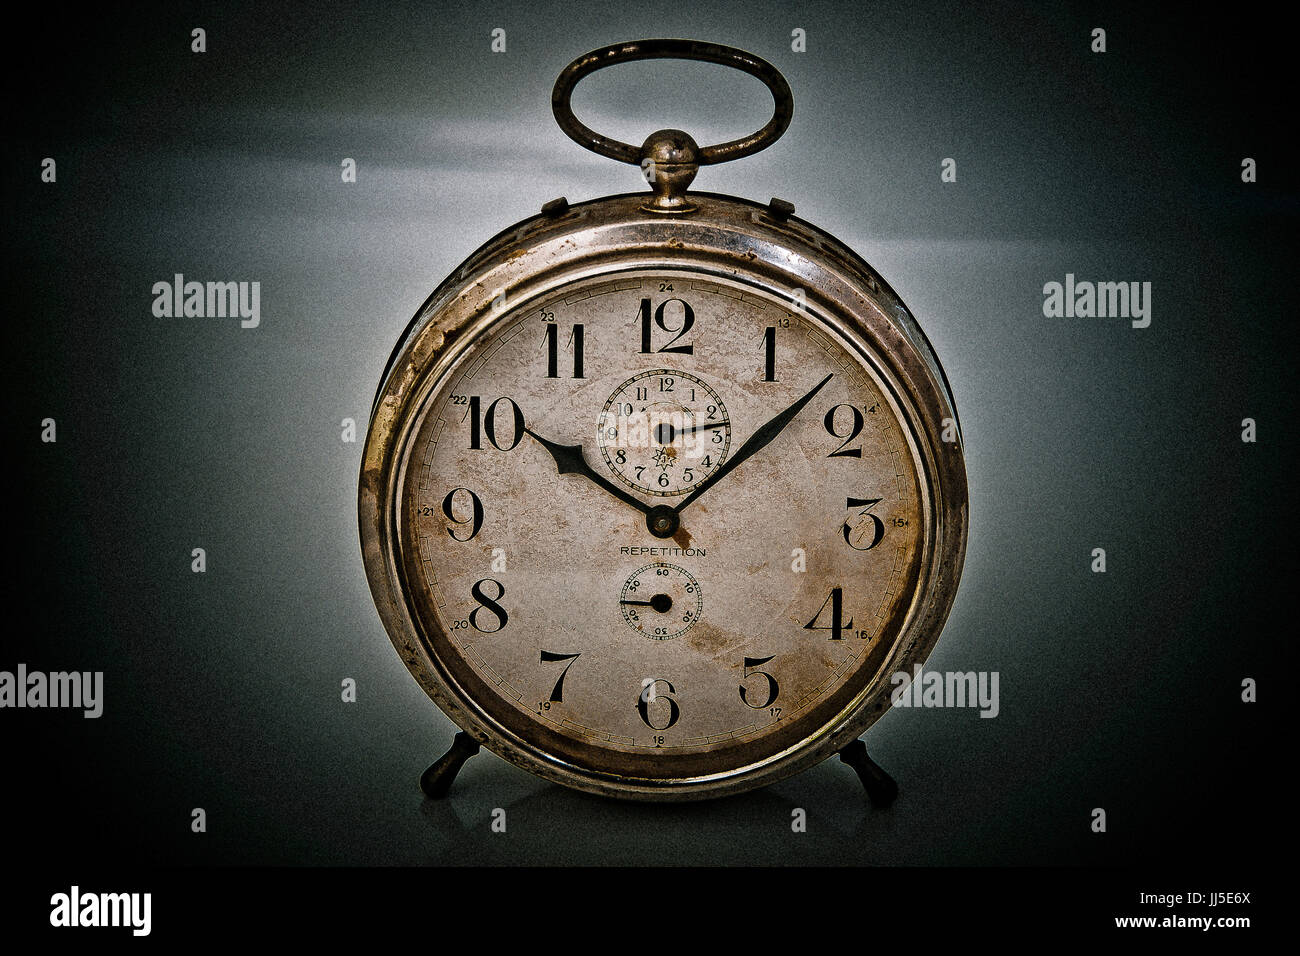 Clocks, hands, pointers, alarm, numbers, hours, Brazil Stock Photo